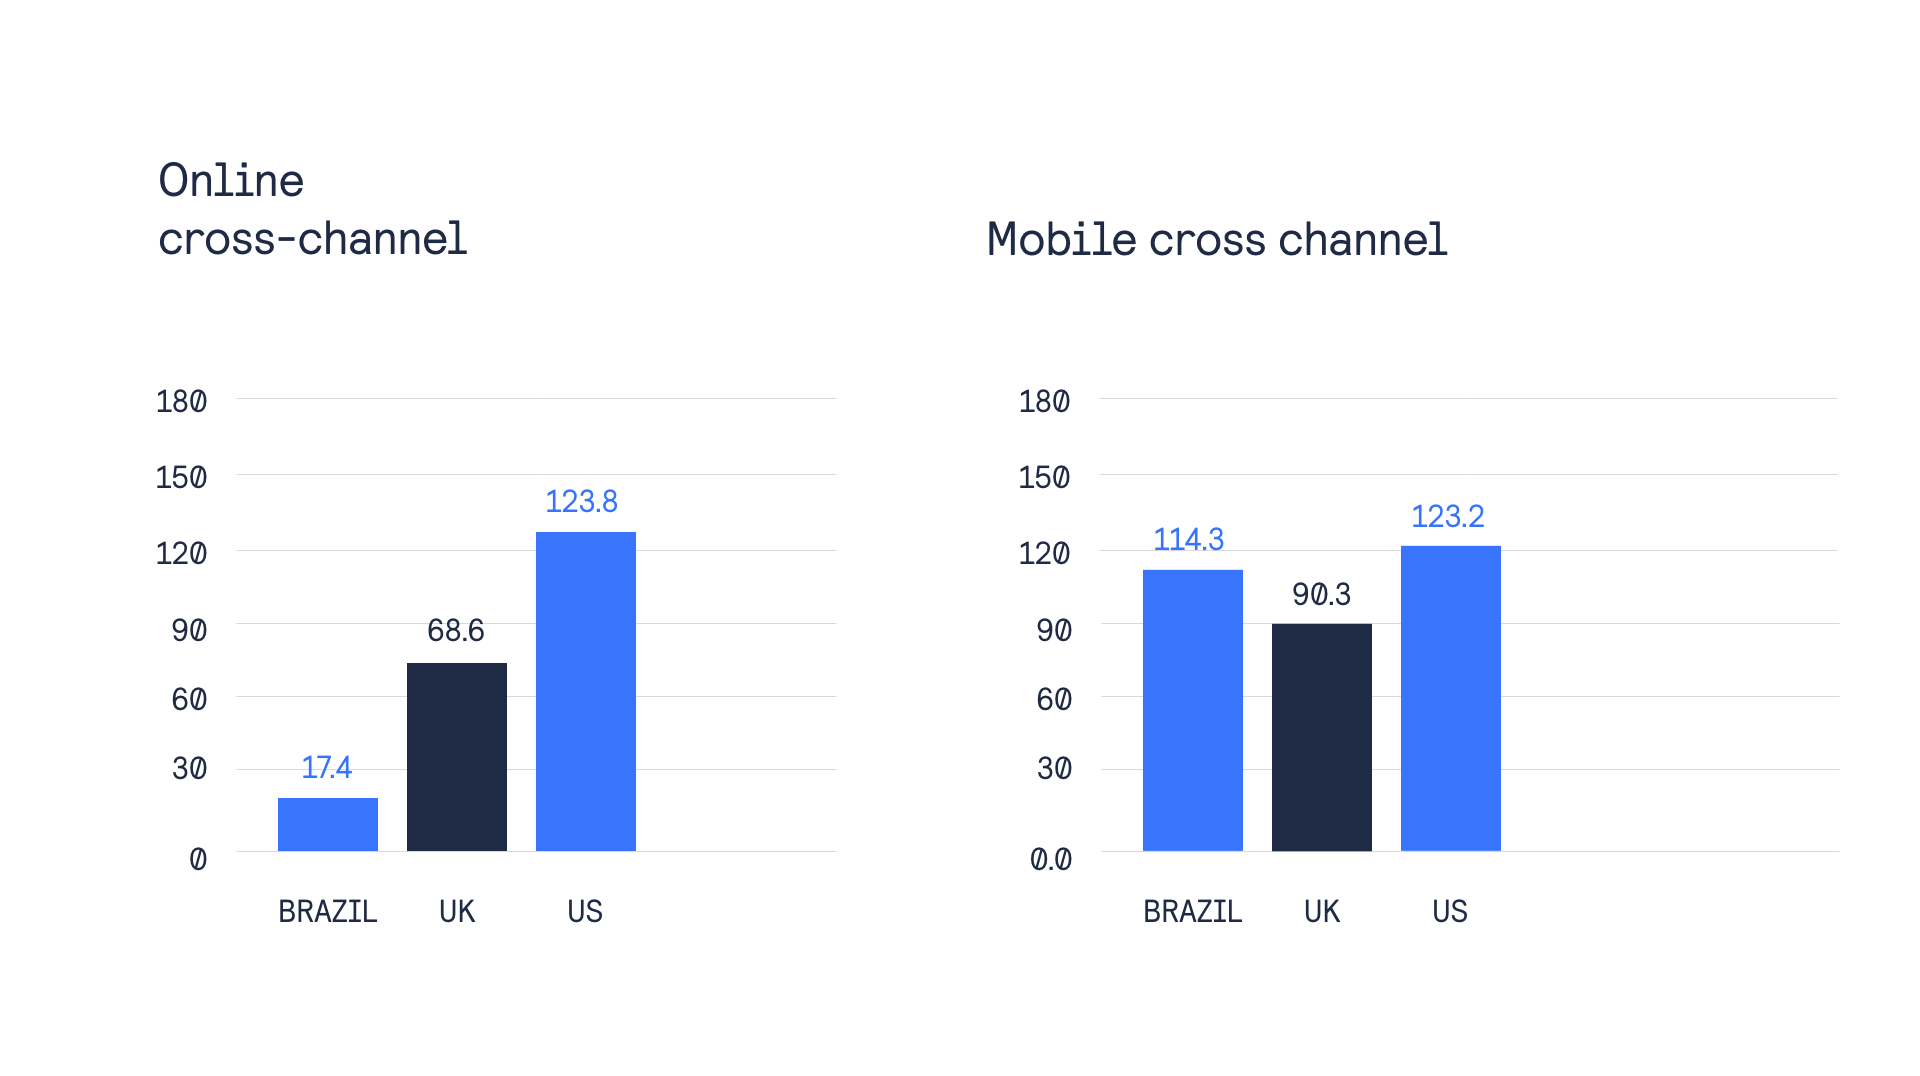 Index scores and shopping journeys chart, online cross-channel and mobile cross-channel.